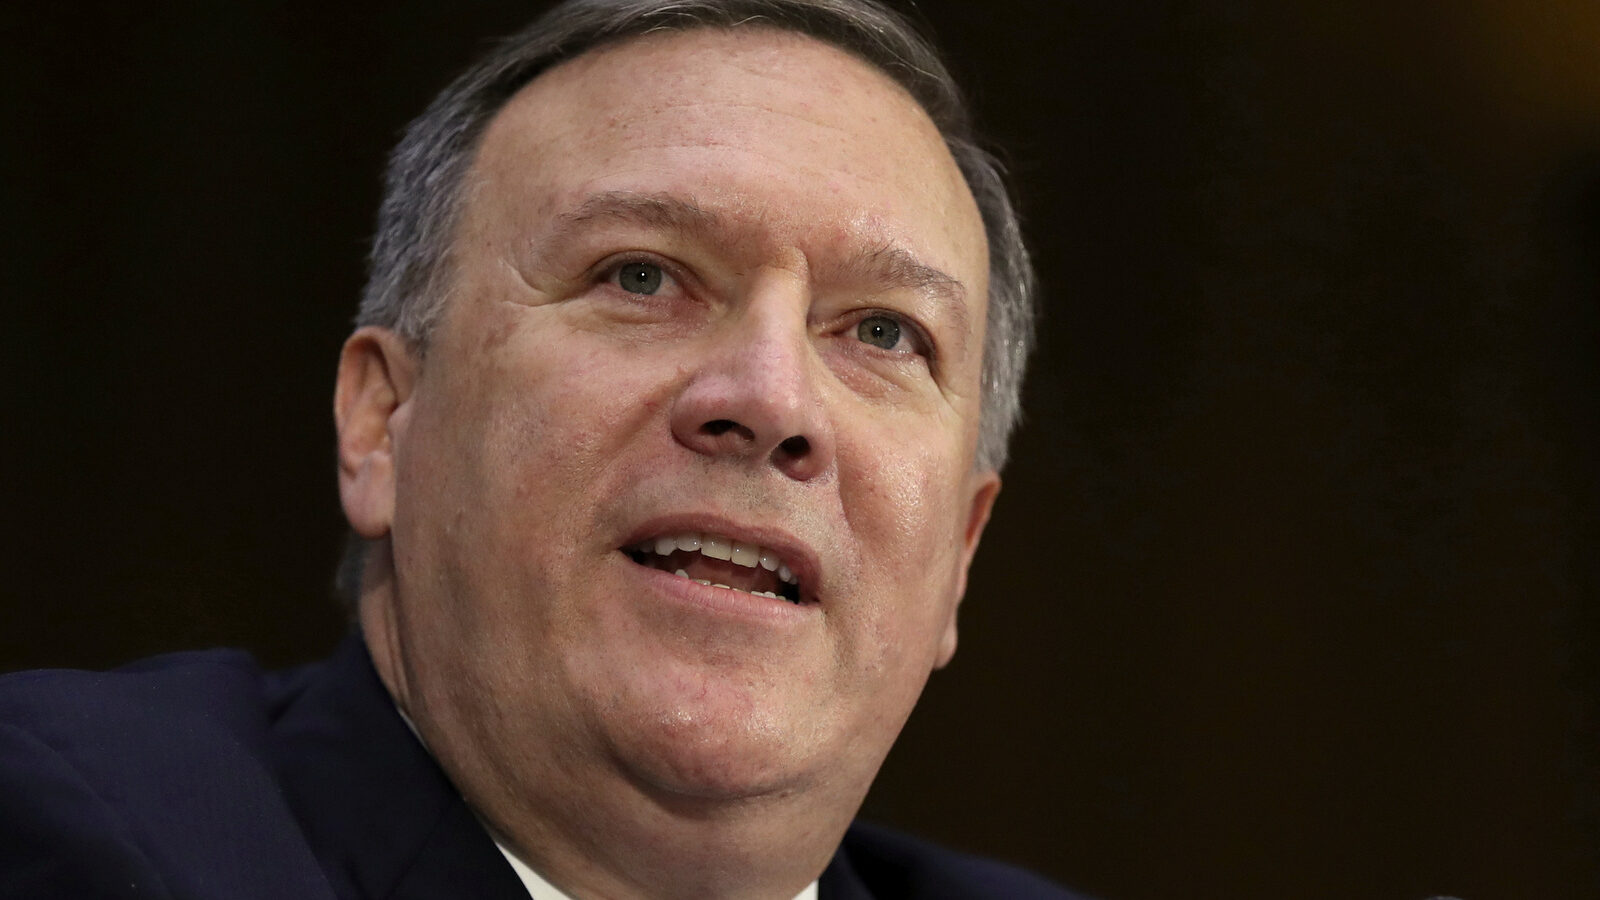 CIA Chief Mike Pompeo is scheduled to arrive Thursday, Feb. 9 in Turkey to discuss security issues on his first overseas trip in his new role (AP/Manuel Balce Ceneta)